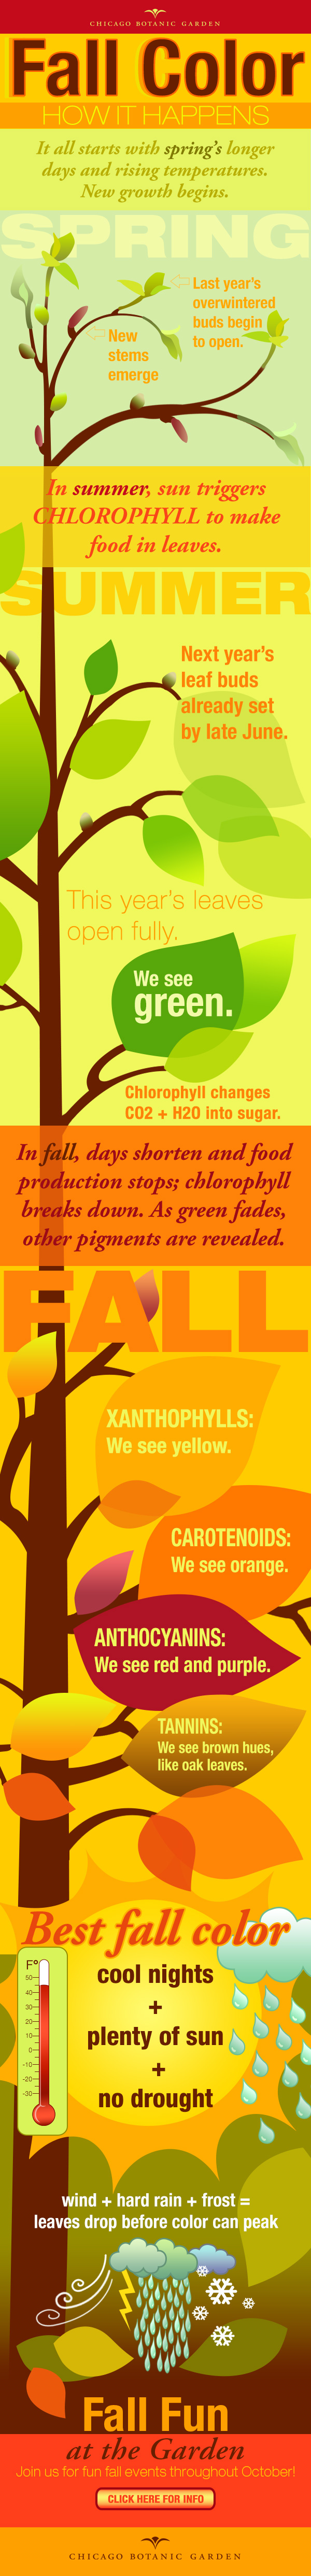 Infographic about Fall Color